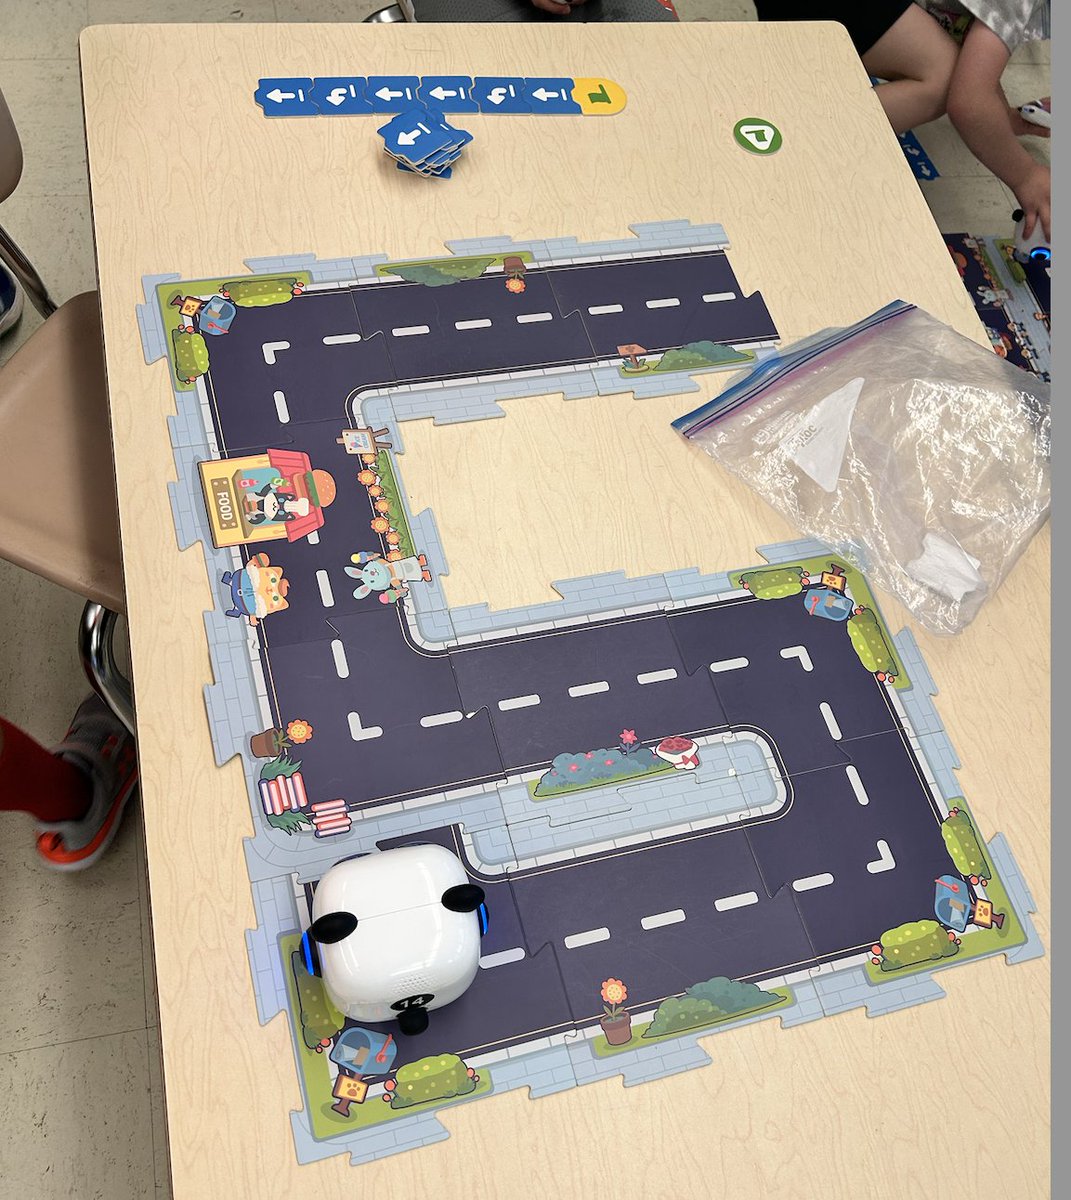 Kindergartners @BarleySheafFRSD were given the task of creating an 'algorithm' using their @MakeblockEdu city map. It always amazes me to see the creativity these Ss possess when they are given the freedom to explore! @rlosanno